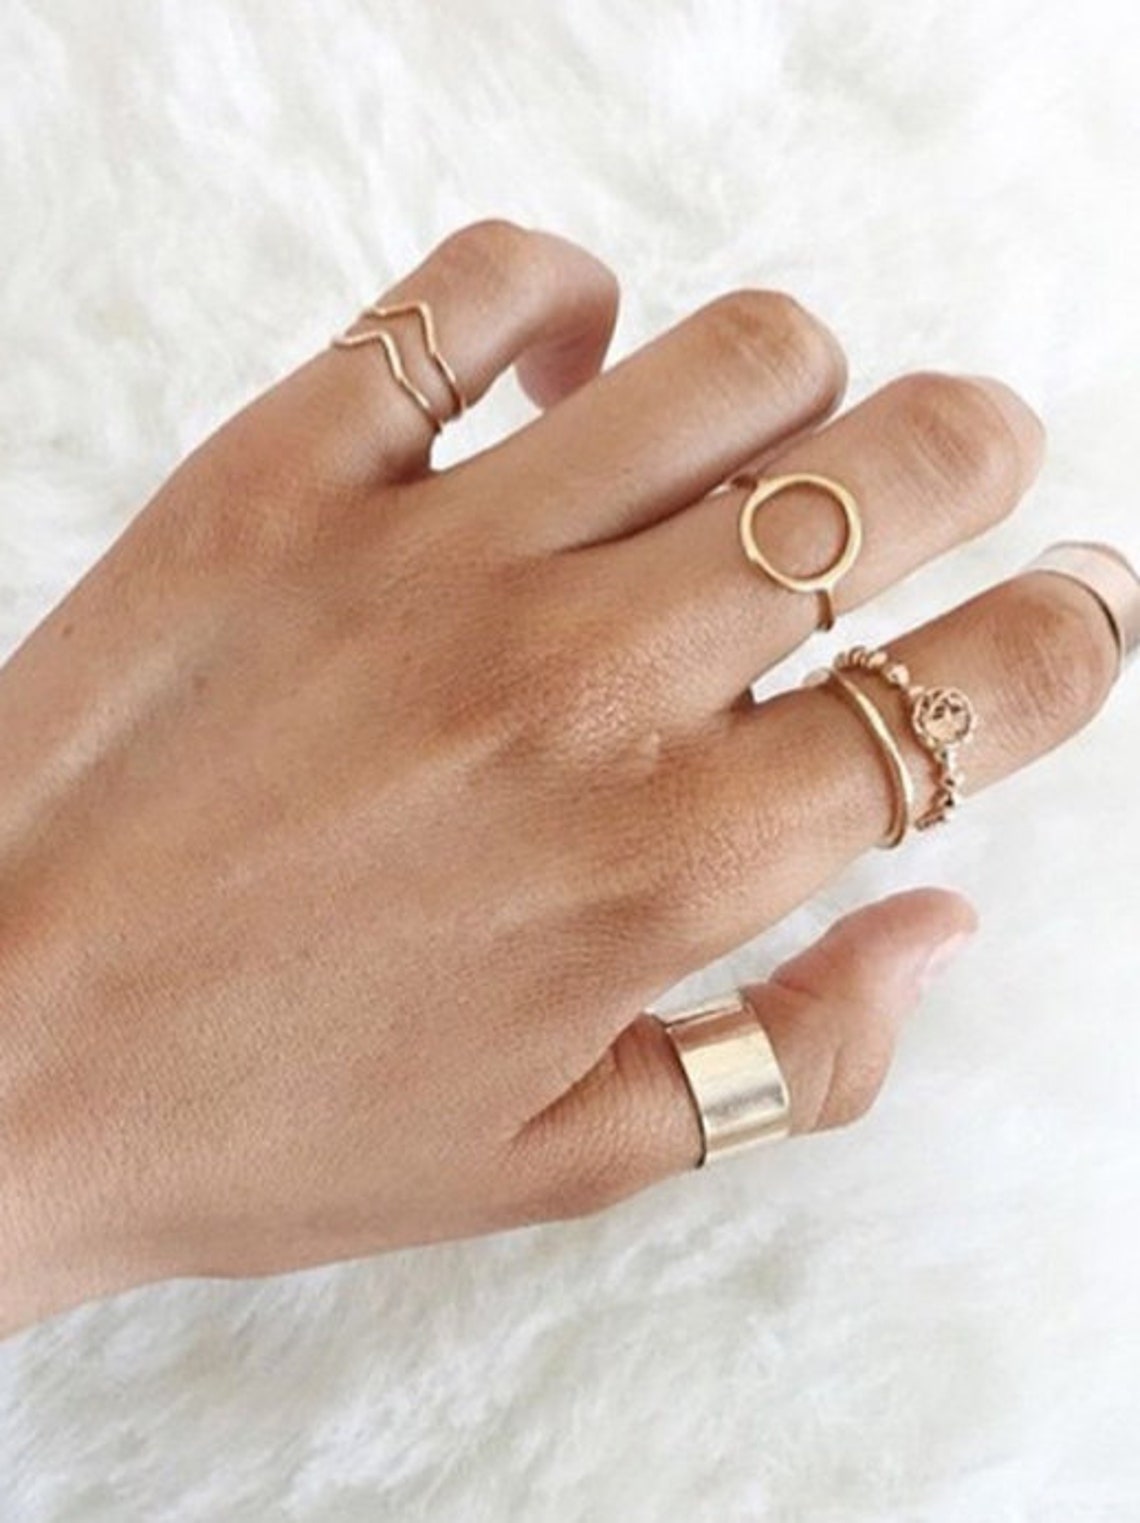 Gold Stacking Ring Set 10mm Wide Gold Ring Everyday Rings 2 Etsy